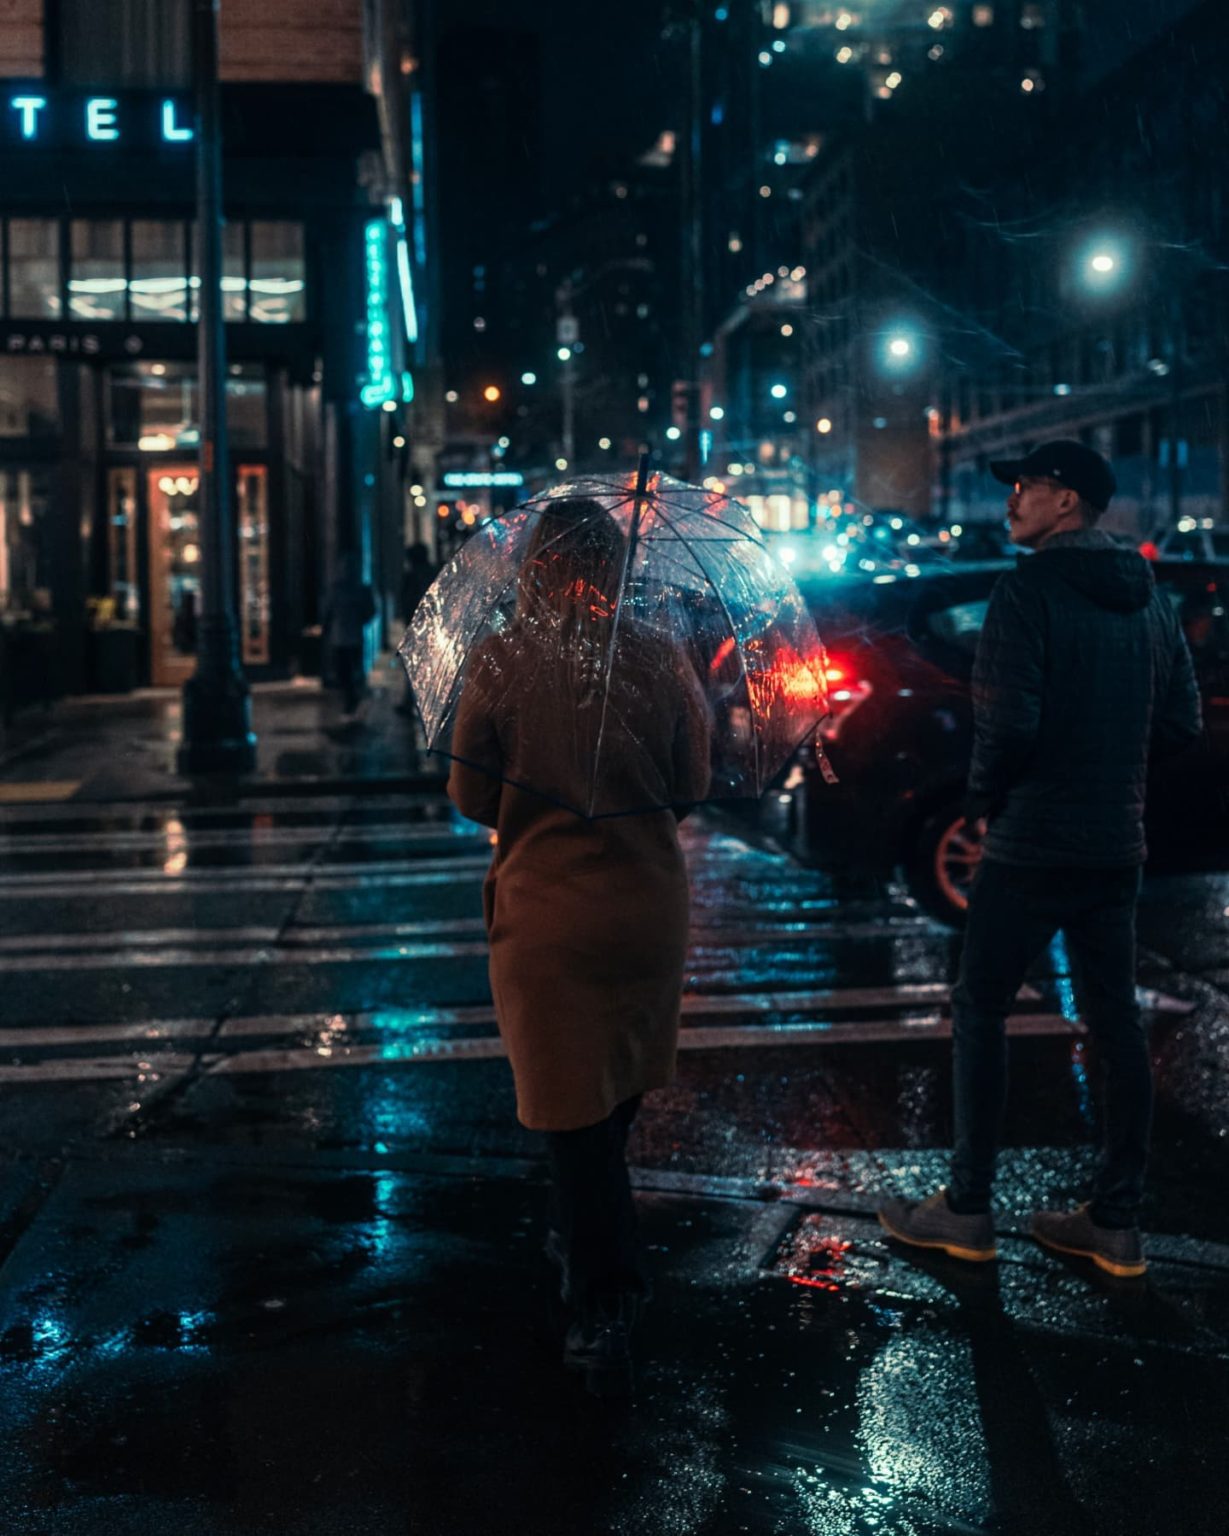 Dystopian Streets Of Seattle In Gloomy Photographs By Tek » Design You ...